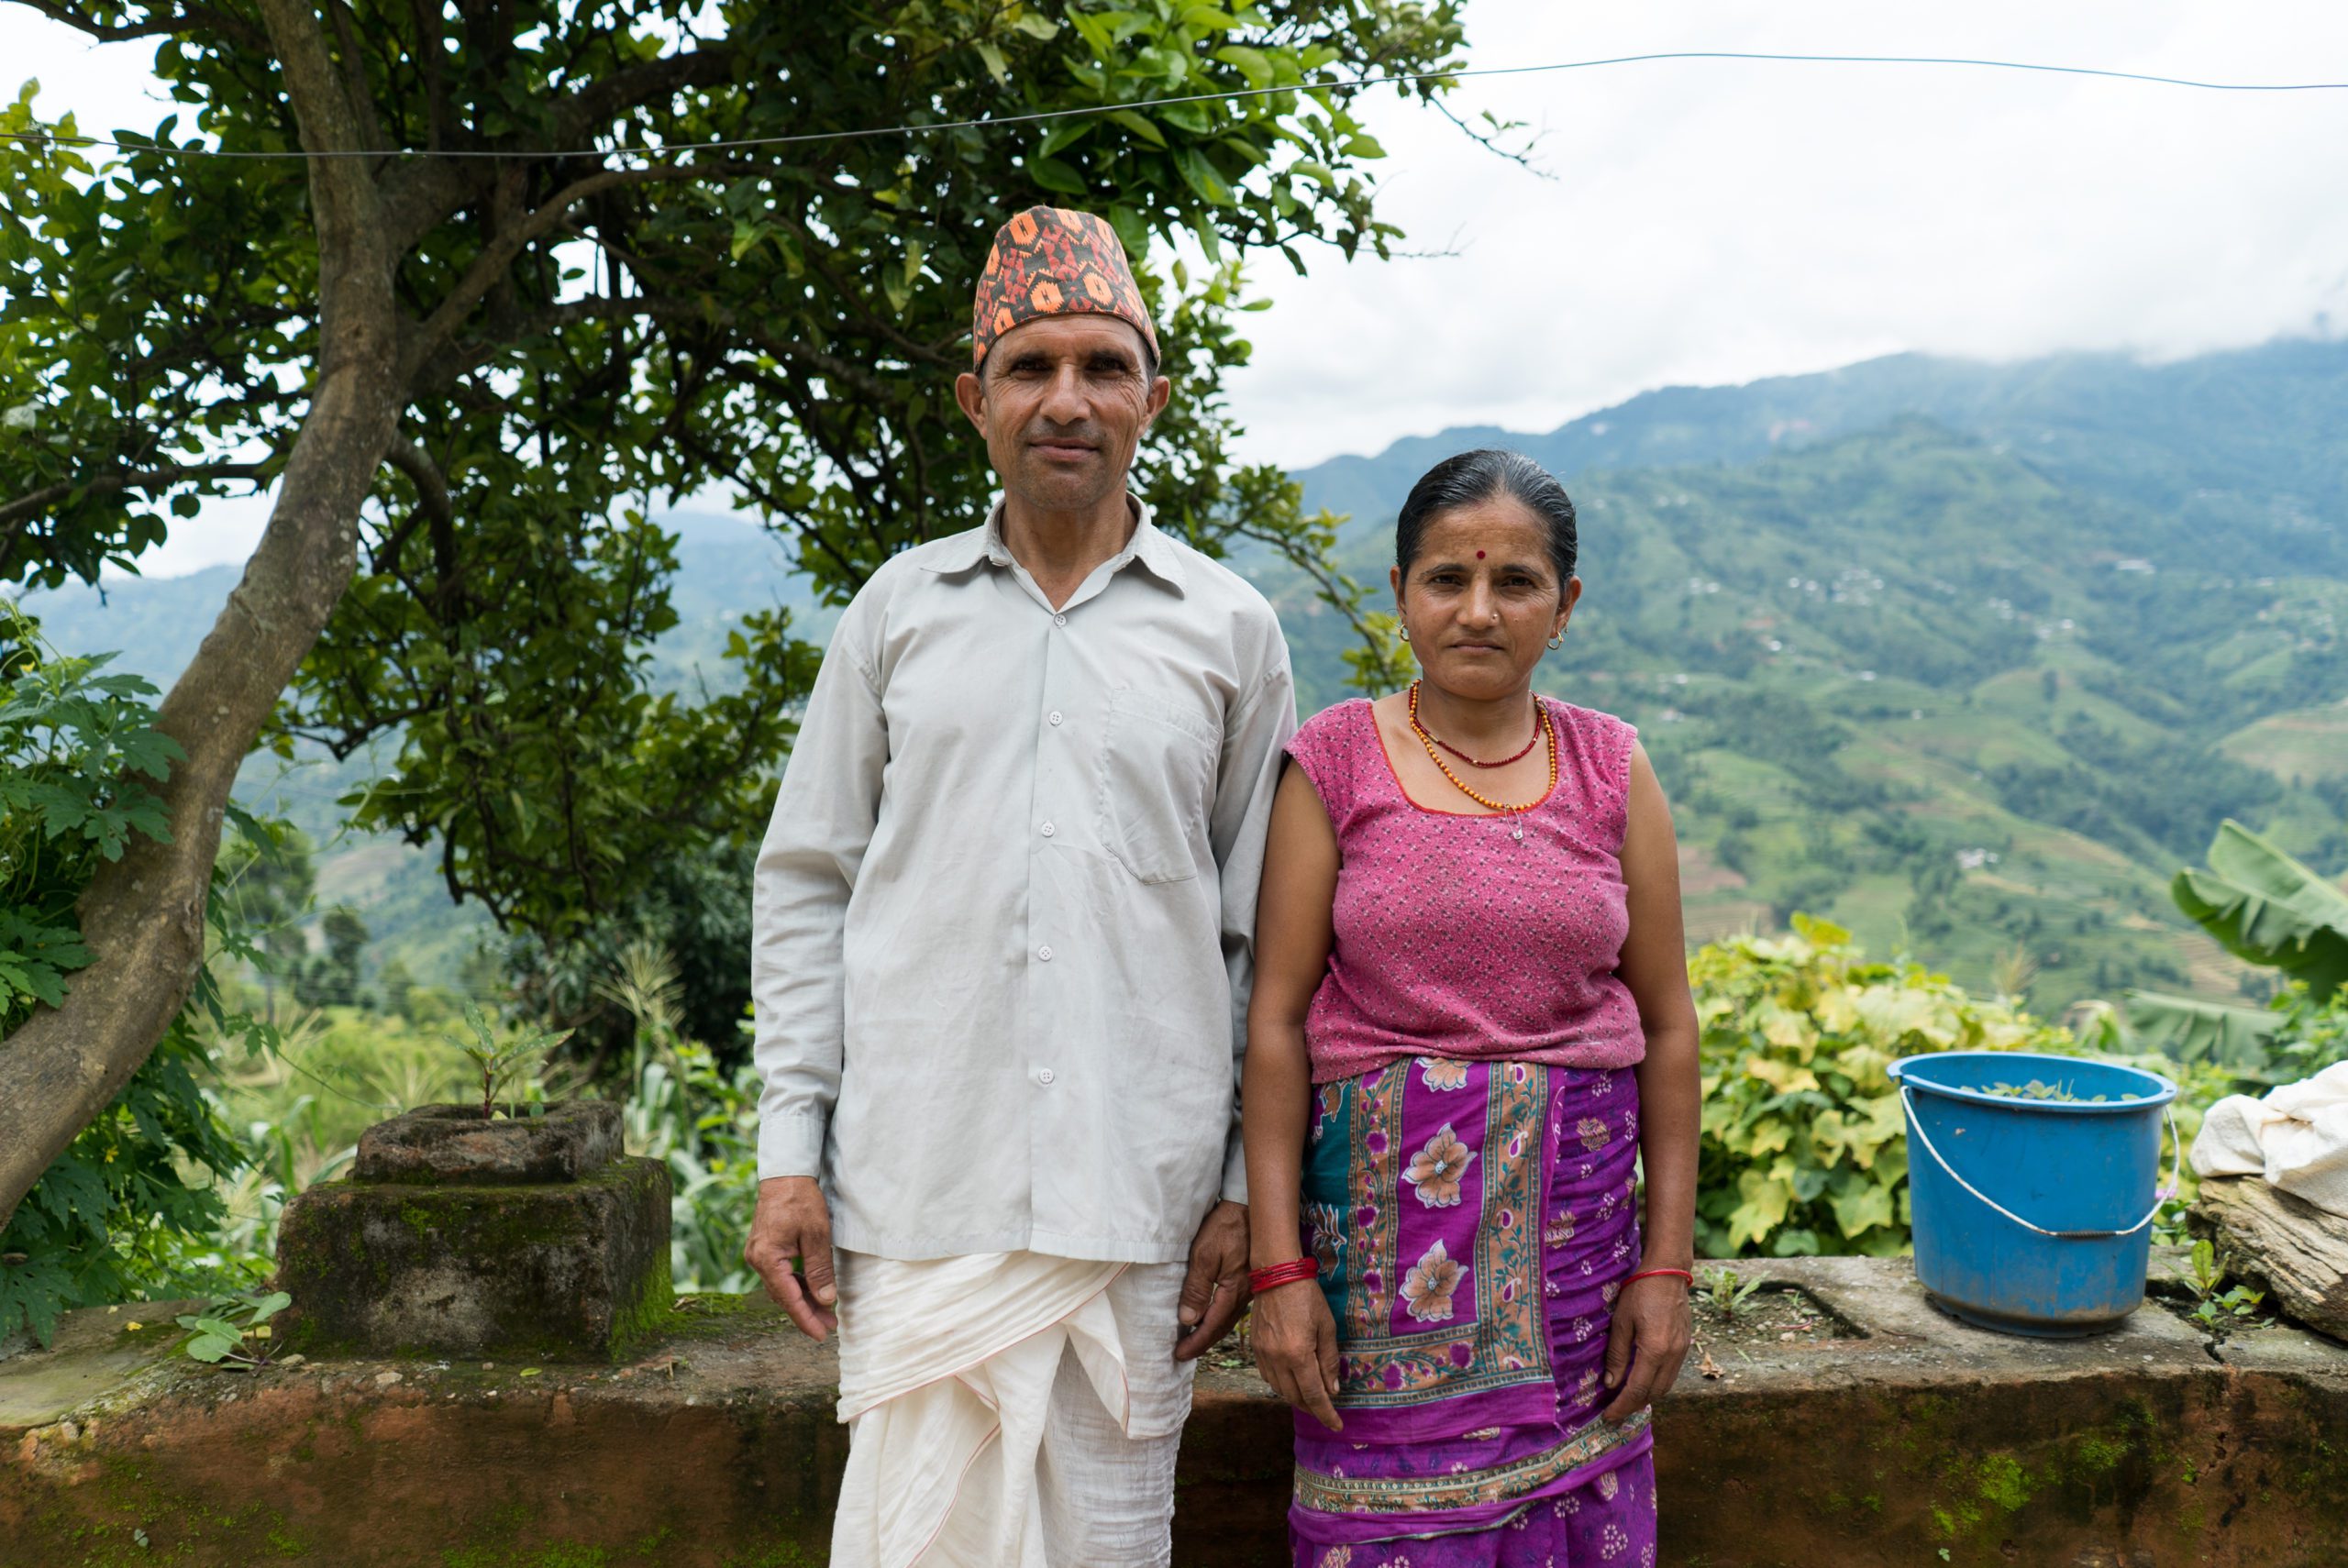 Bhartman Sigdel along with his wife Devaki Sigdel pose for a portrait outside their home in Sindhukot, Sindhupalchowk district. They are currently living in a temporary shelter as their house was damaged in the 2015 earthquake.